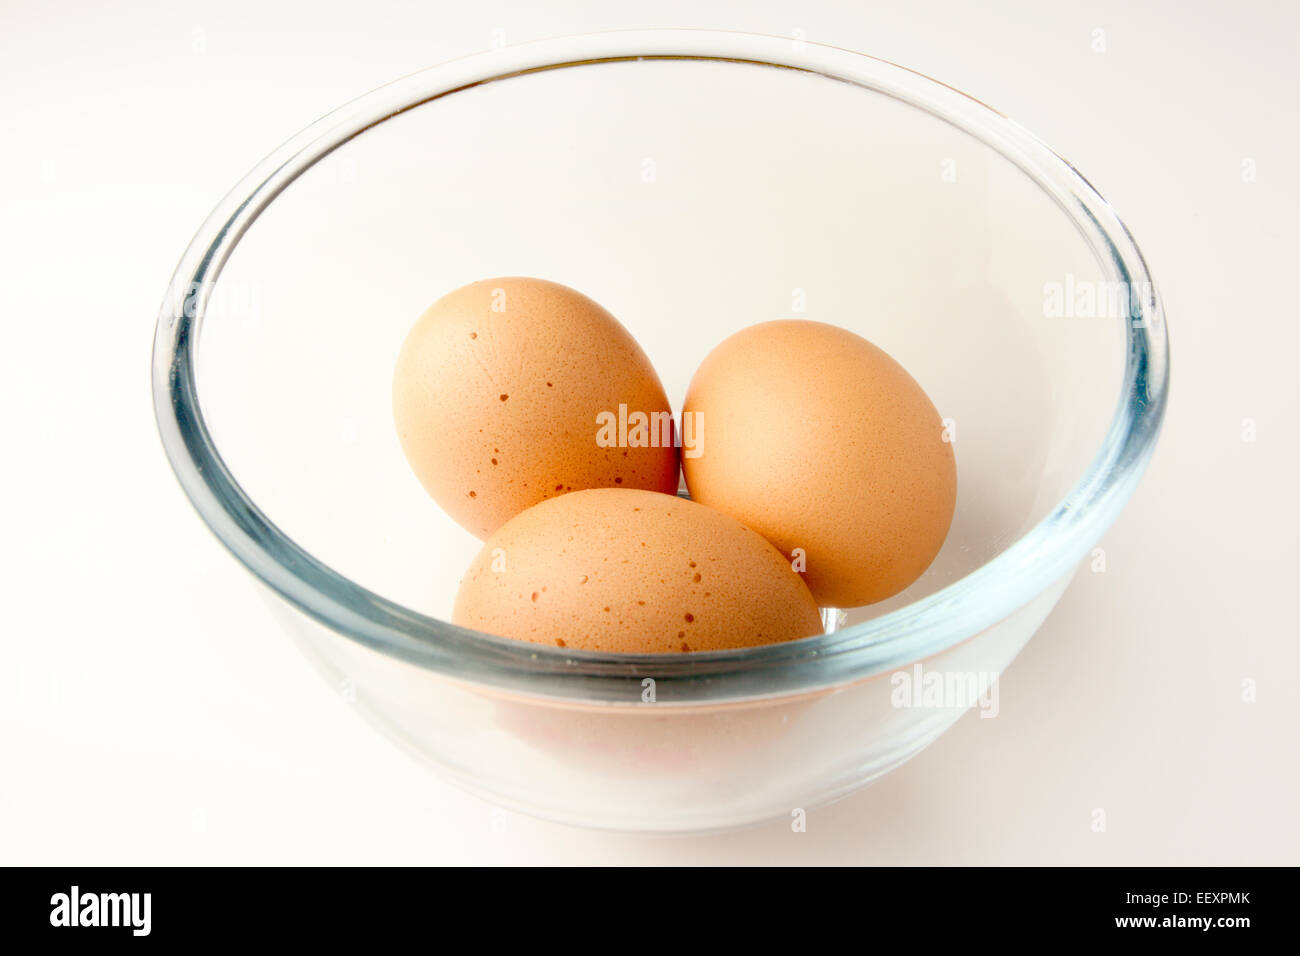 Three Brown Free Range Eggs in a Glass Bowl Stock Photo